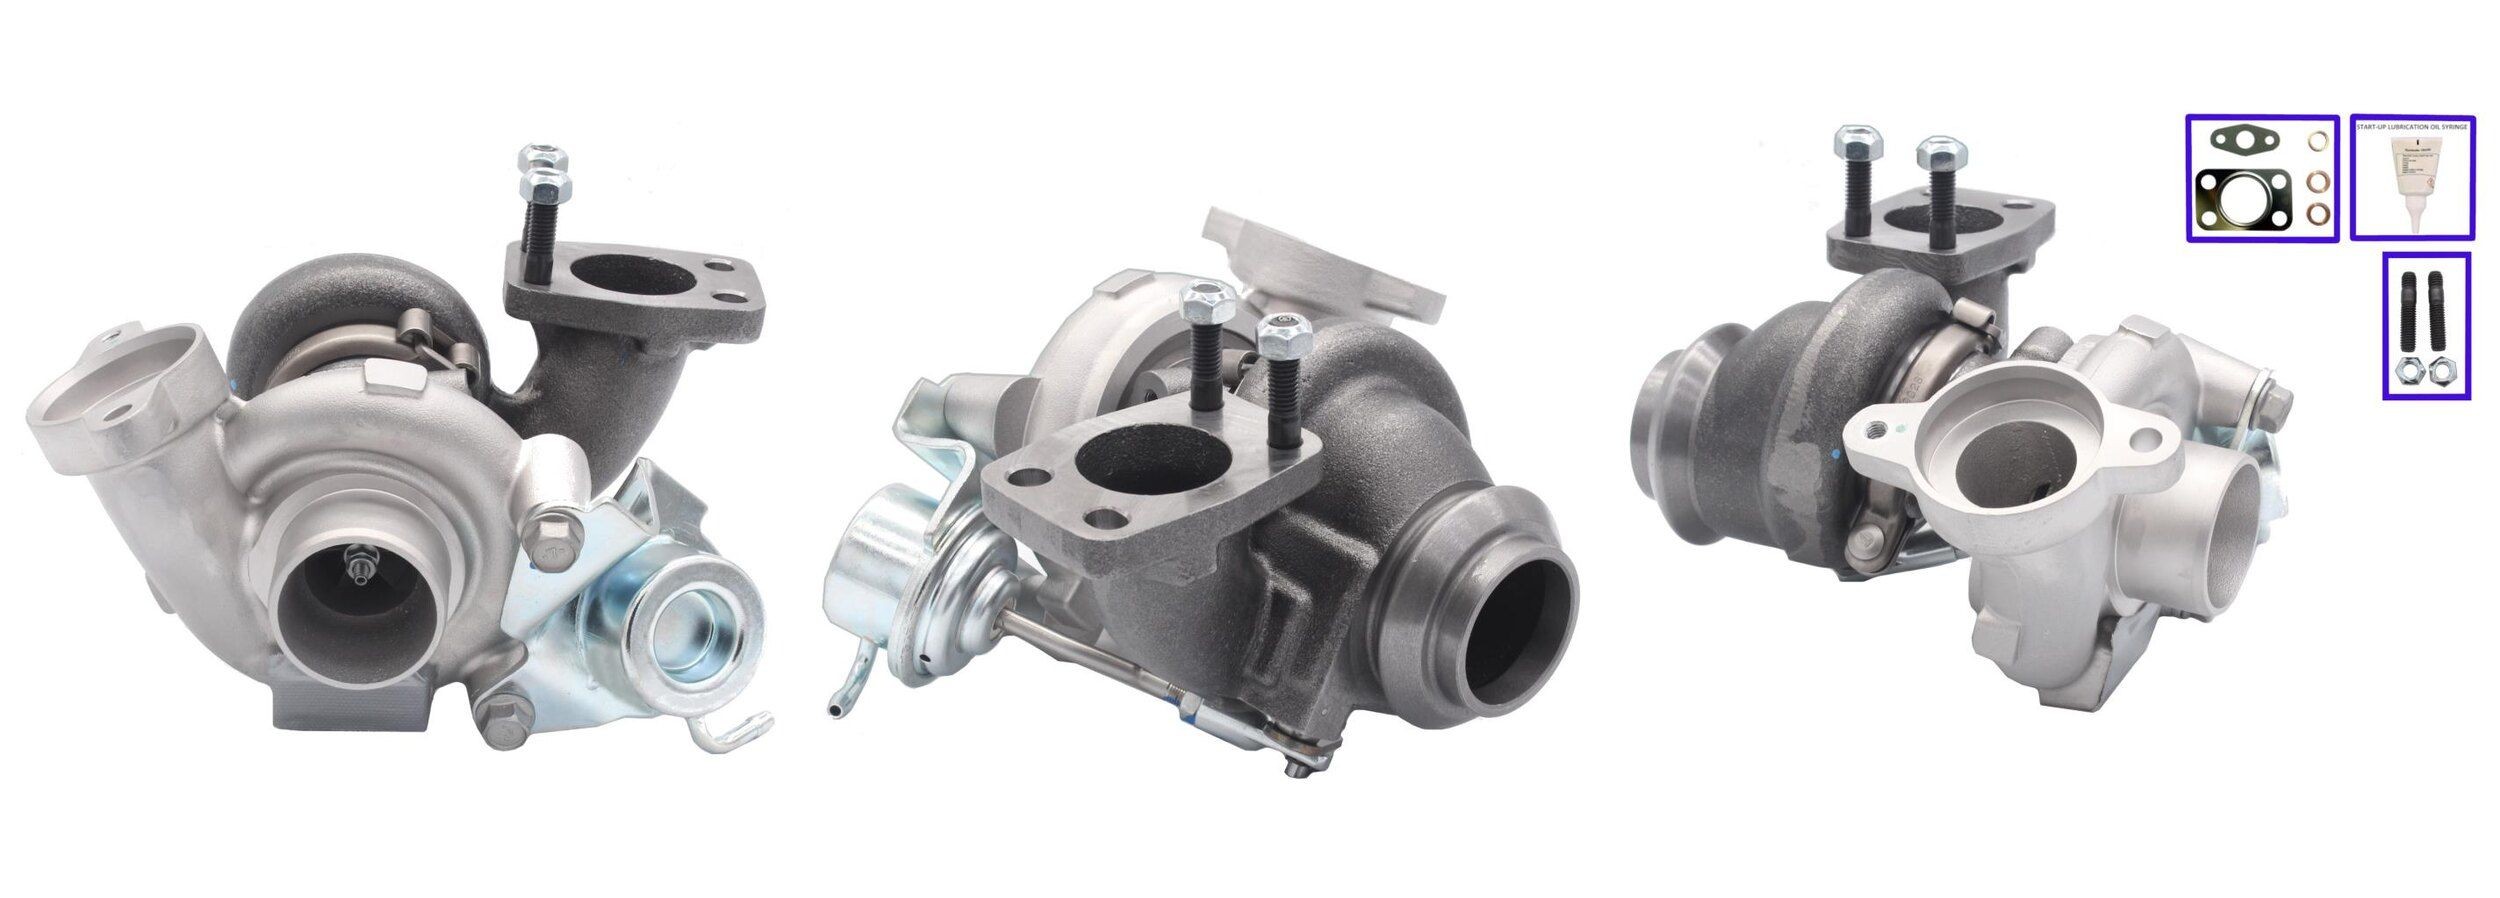 TURBO MOTOR PA4917307500 Turbocharger Exhaust Turbocharger, Pneumatically controlled actuator, with gaskets/seals